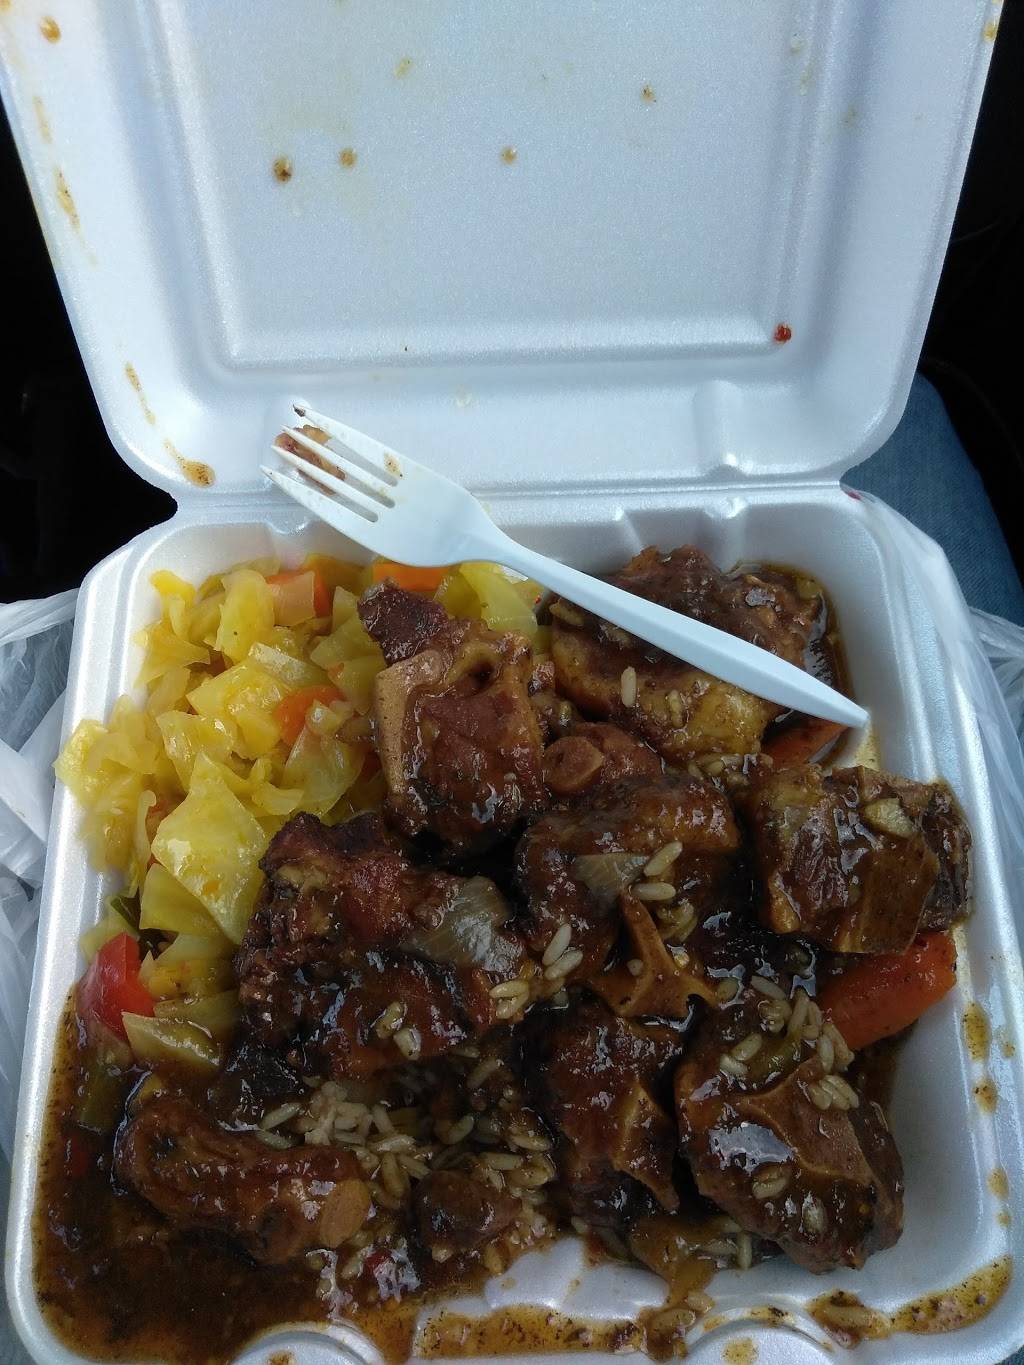 OBs Jamaican Restaurant | restaurant | 1000 W 2nd St, Chester, PA 19013, USA | 6108744530 OR +1 610-874-4530